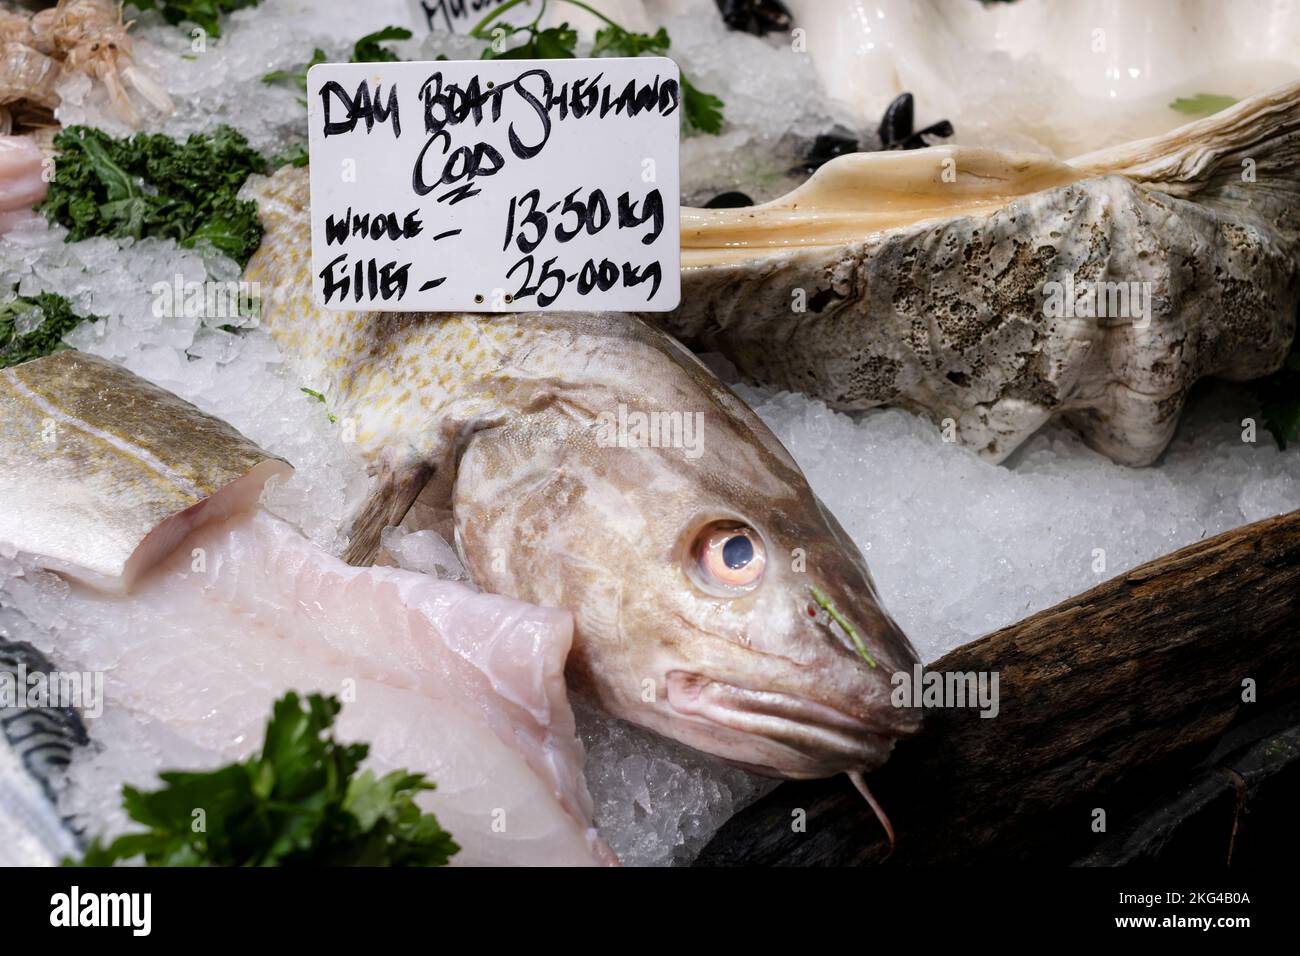 A large fresh Shetland boat caught Cod fish for sale on a market stall. the fish is whole and displayed on ice with a price tag. Stock Photo